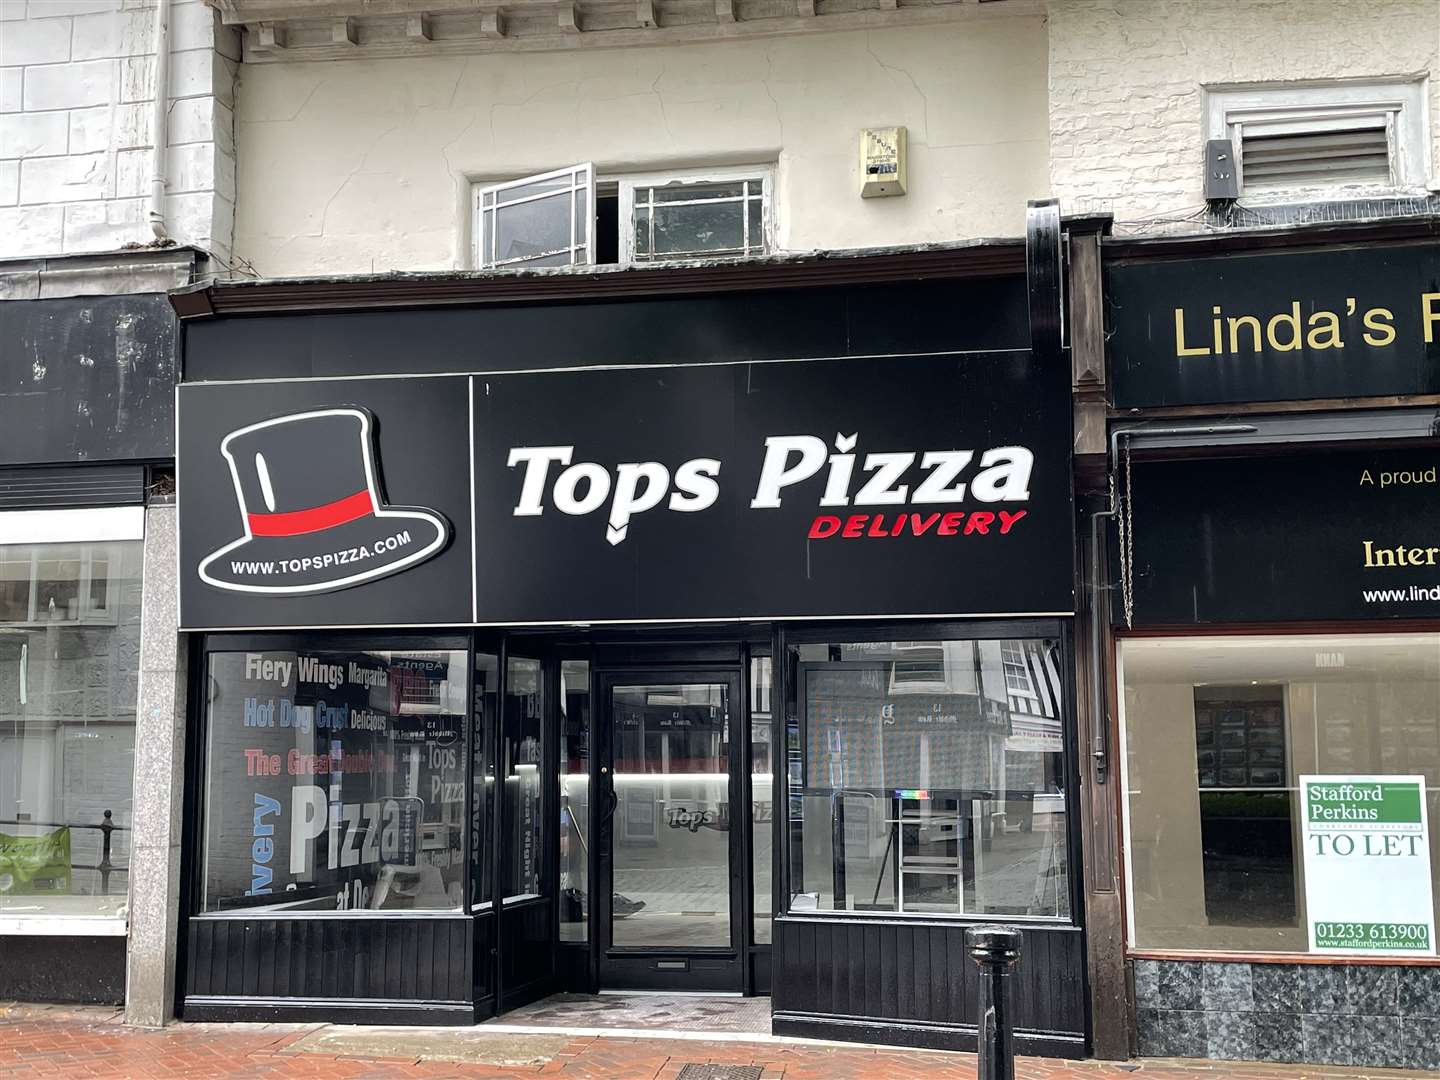 Tops Pizza has filled an empty unit in the Lower High Street